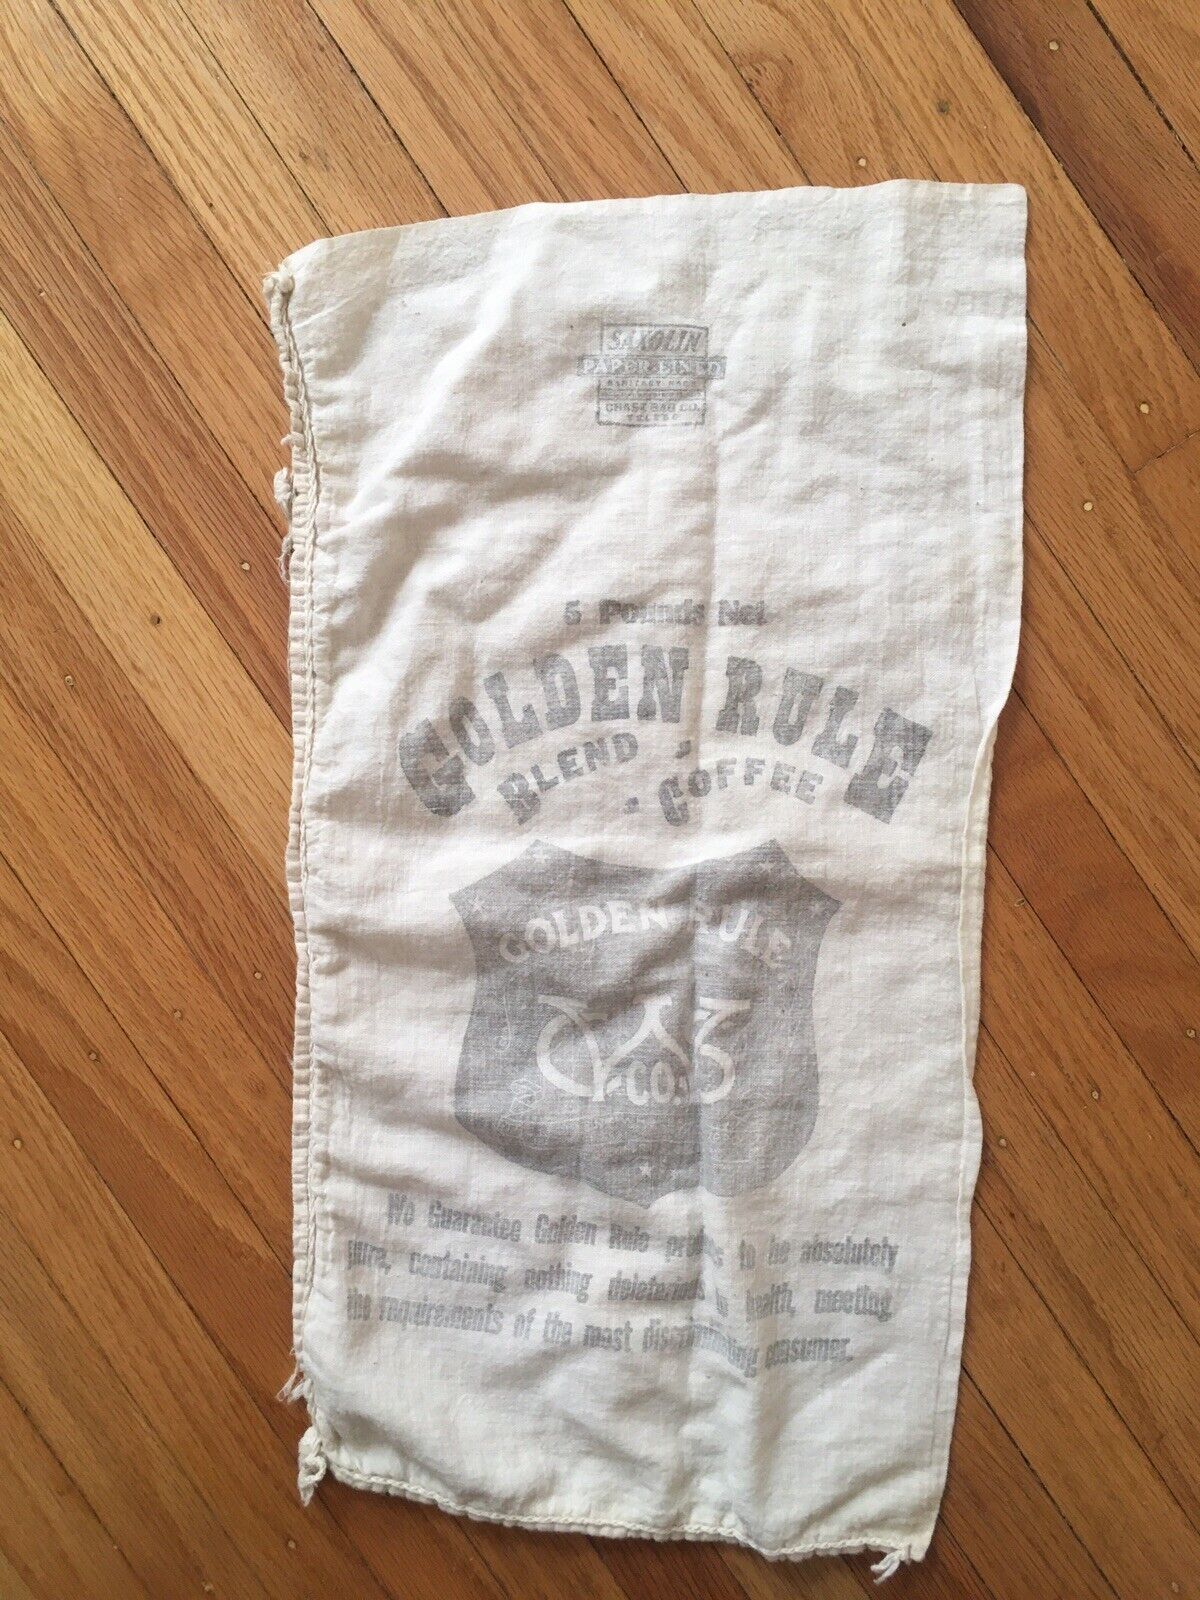 Golden Rule Coffee 5 Lb Coffee Can linen bag cloth chase co Litho Advertising